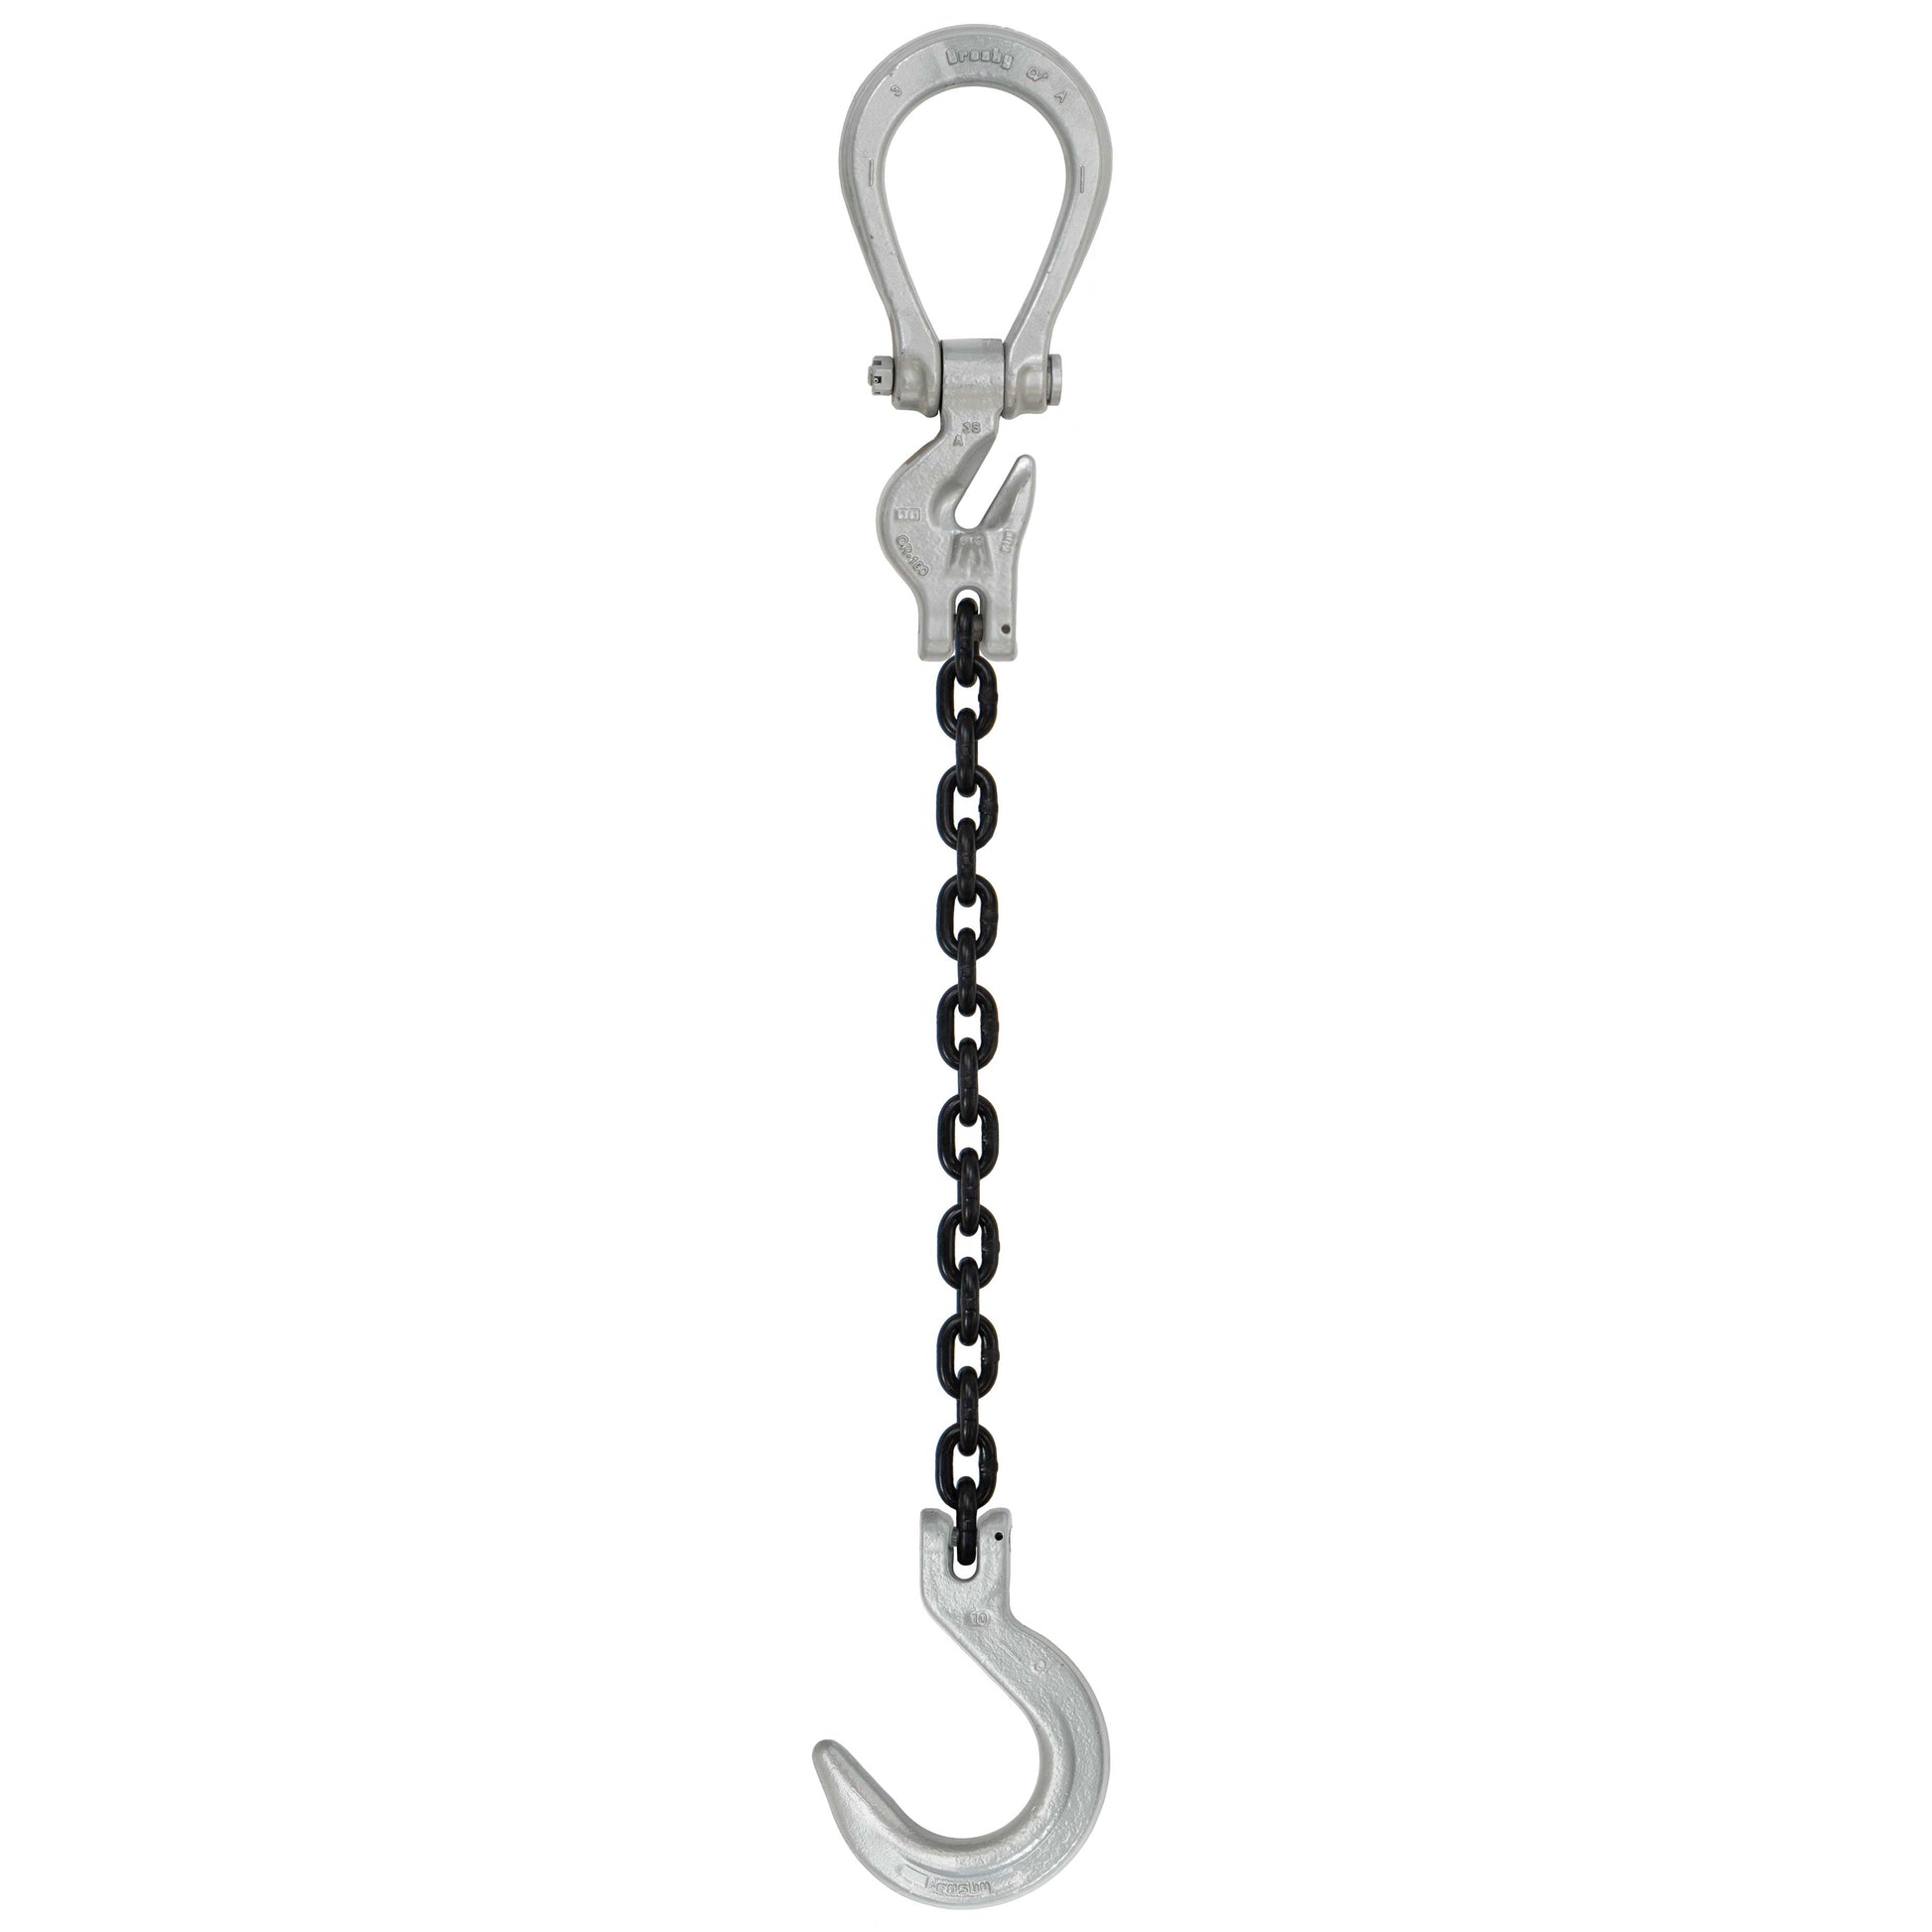 38 inch x 15 foot Domestic Adjustable Single Leg Chain Sling w Crosby Foundry Hook Grade 100 image 1 of 2